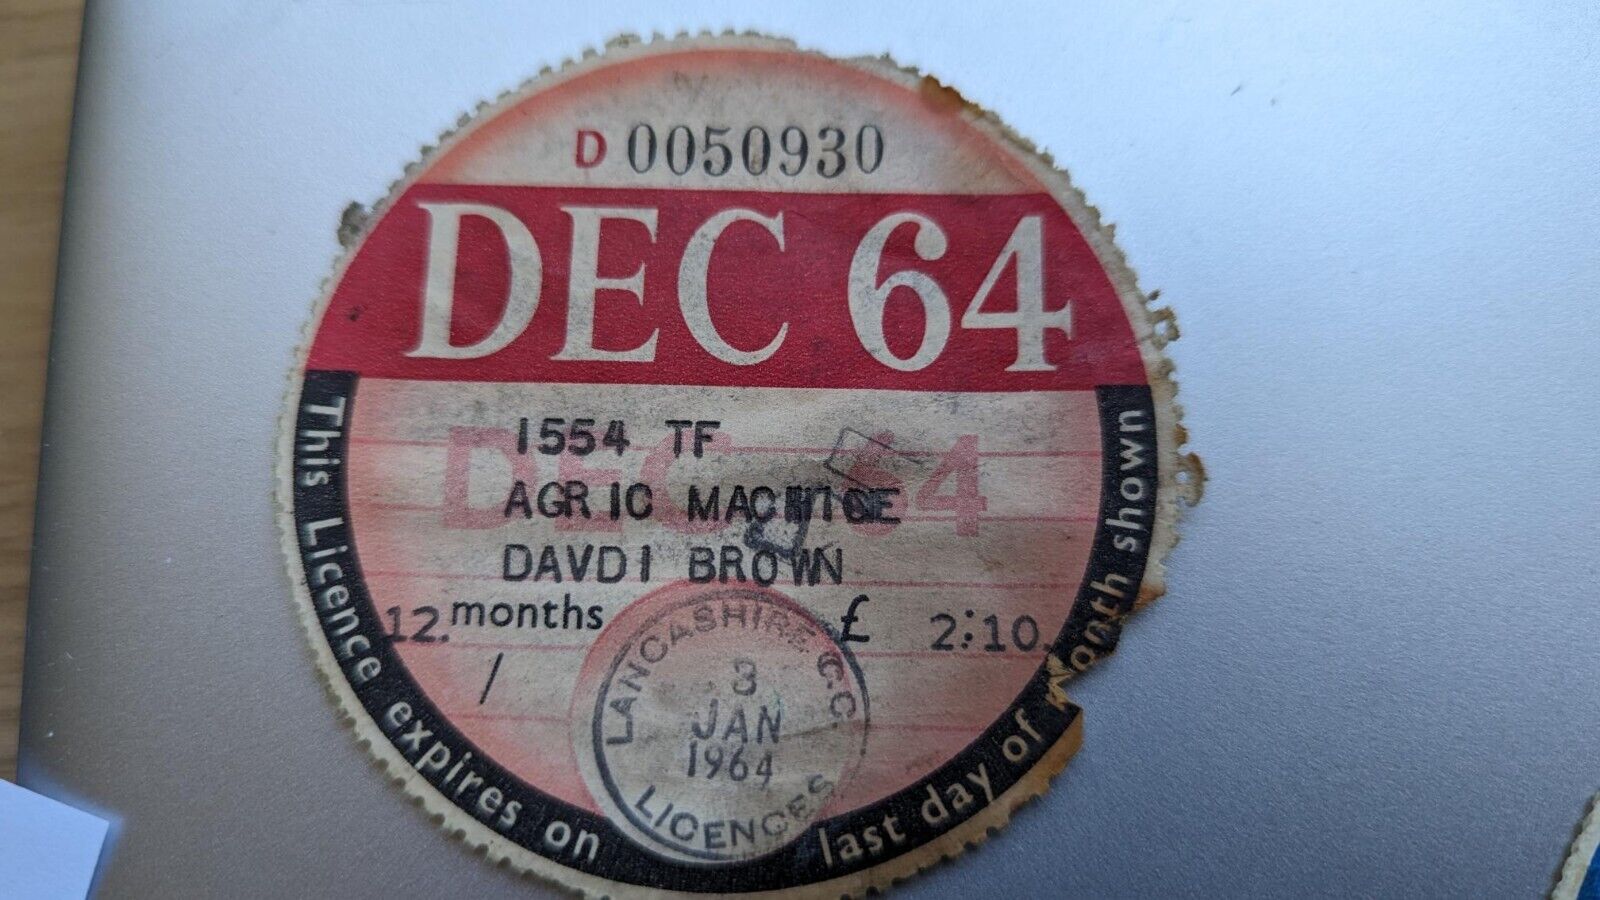 Rare Collectable old tax disc from DEC 64.......................................